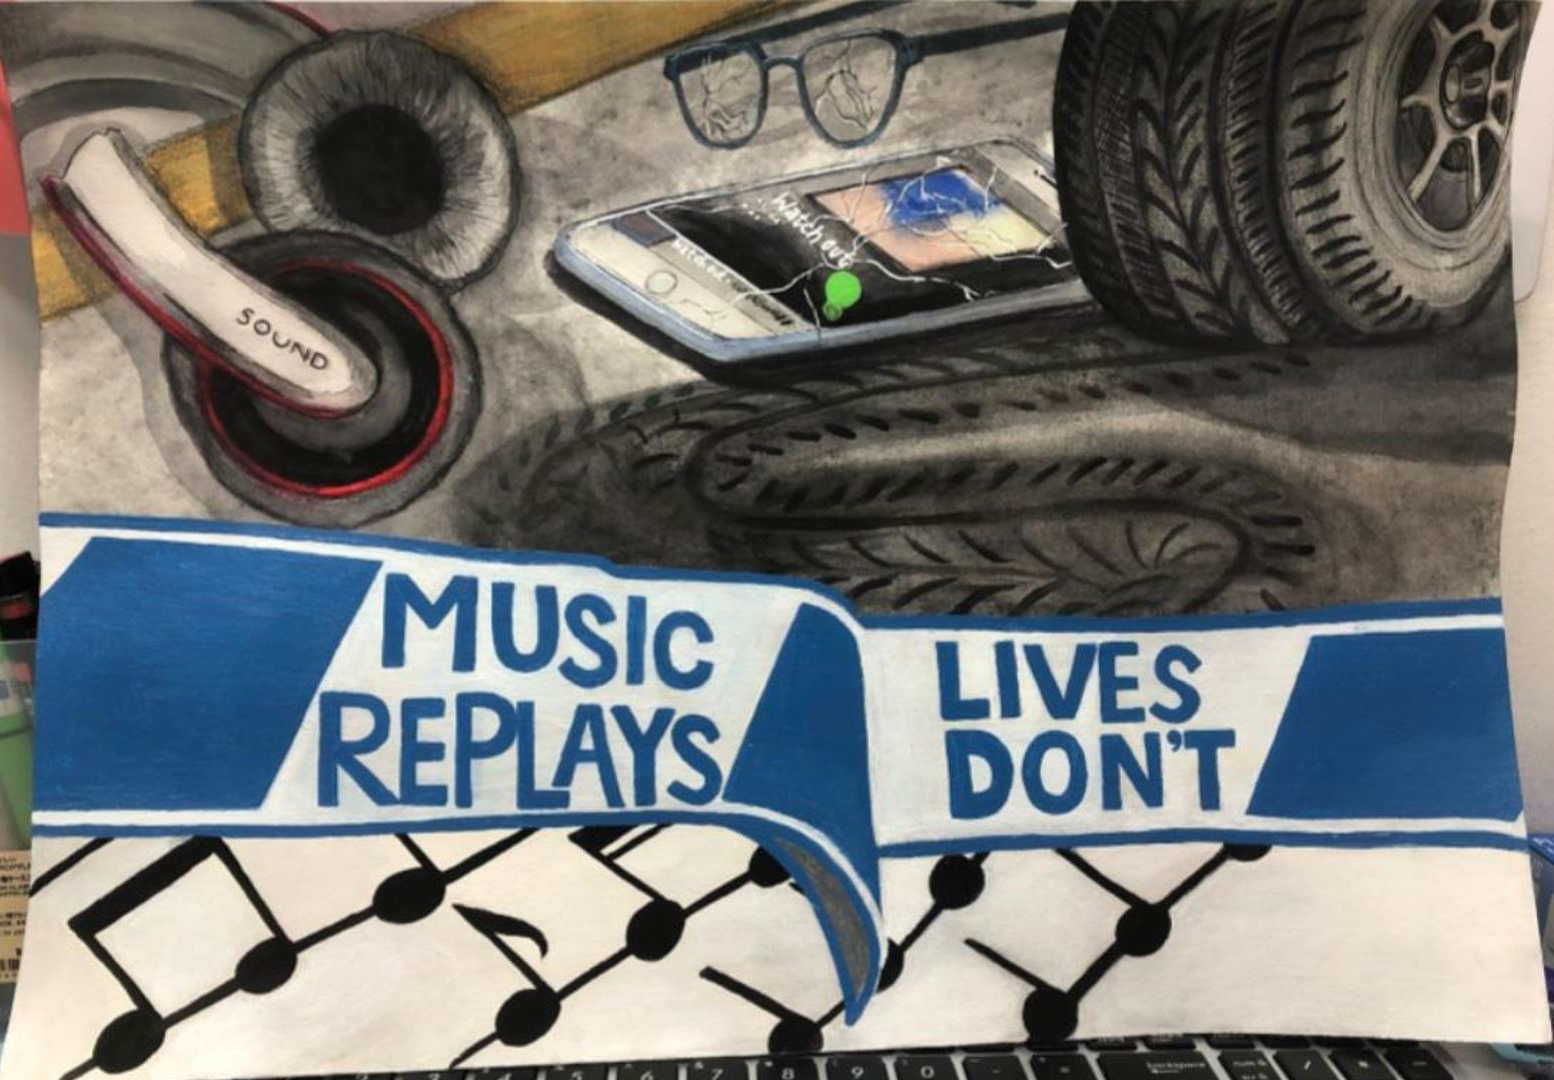 'Music Replays, Lives Don't' artwork, by Sheryln Chow